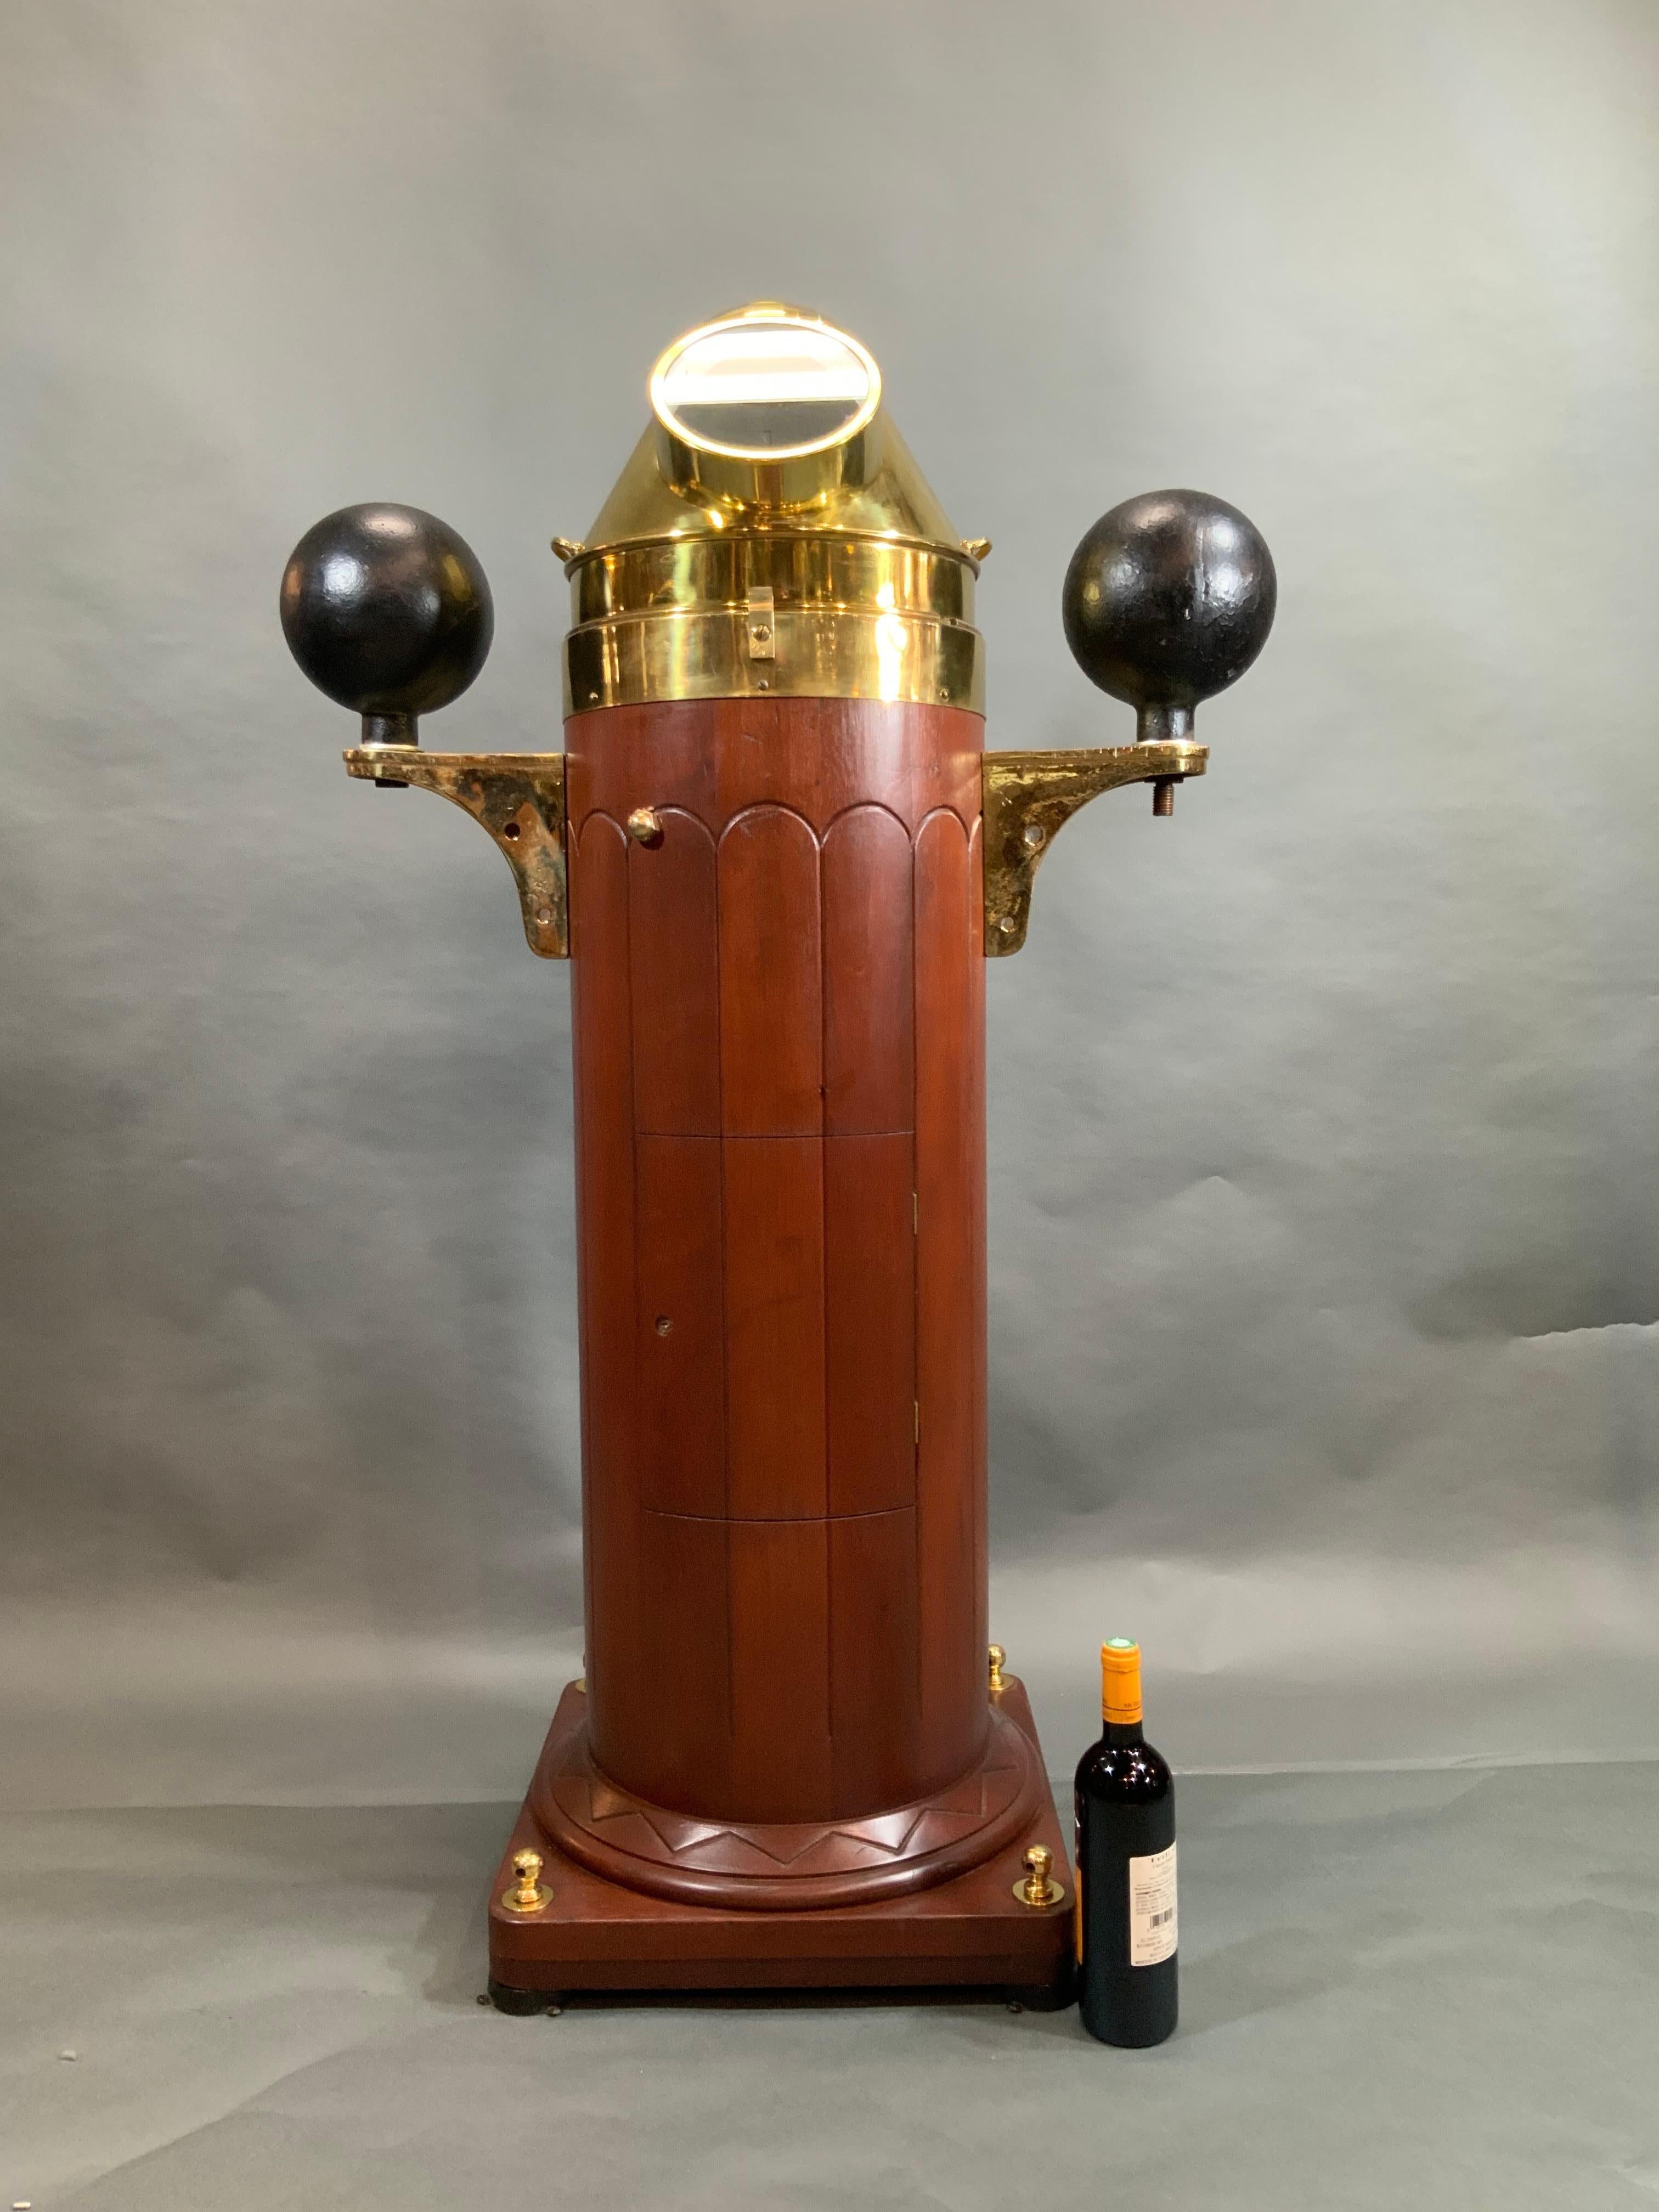 Classic yacht binnacle with a fabulous mahogany base with exceptional detail and a beautiful finish. The brasses are highly polished and lacquered. The interior has been wired with lighting by us. Baker Lyman gimballed compass, also polished and